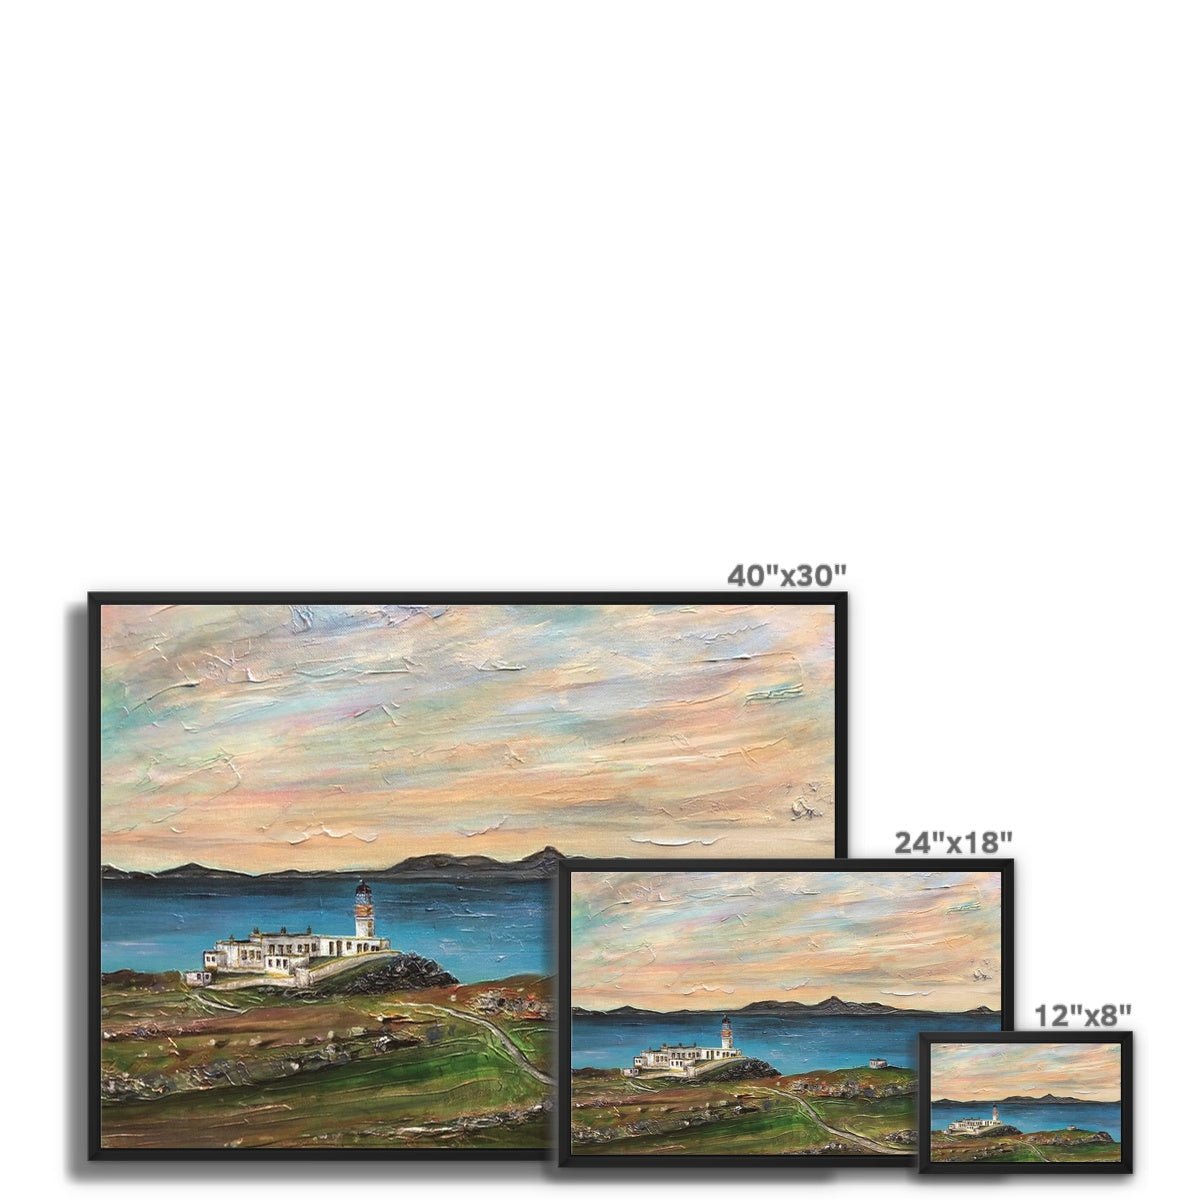 Neist Point Skye Painting | Framed Canvas From Scotland-Floating Framed Canvas Prints-Skye Art Gallery-Paintings, Prints, Homeware, Art Gifts From Scotland By Scottish Artist Kevin Hunter